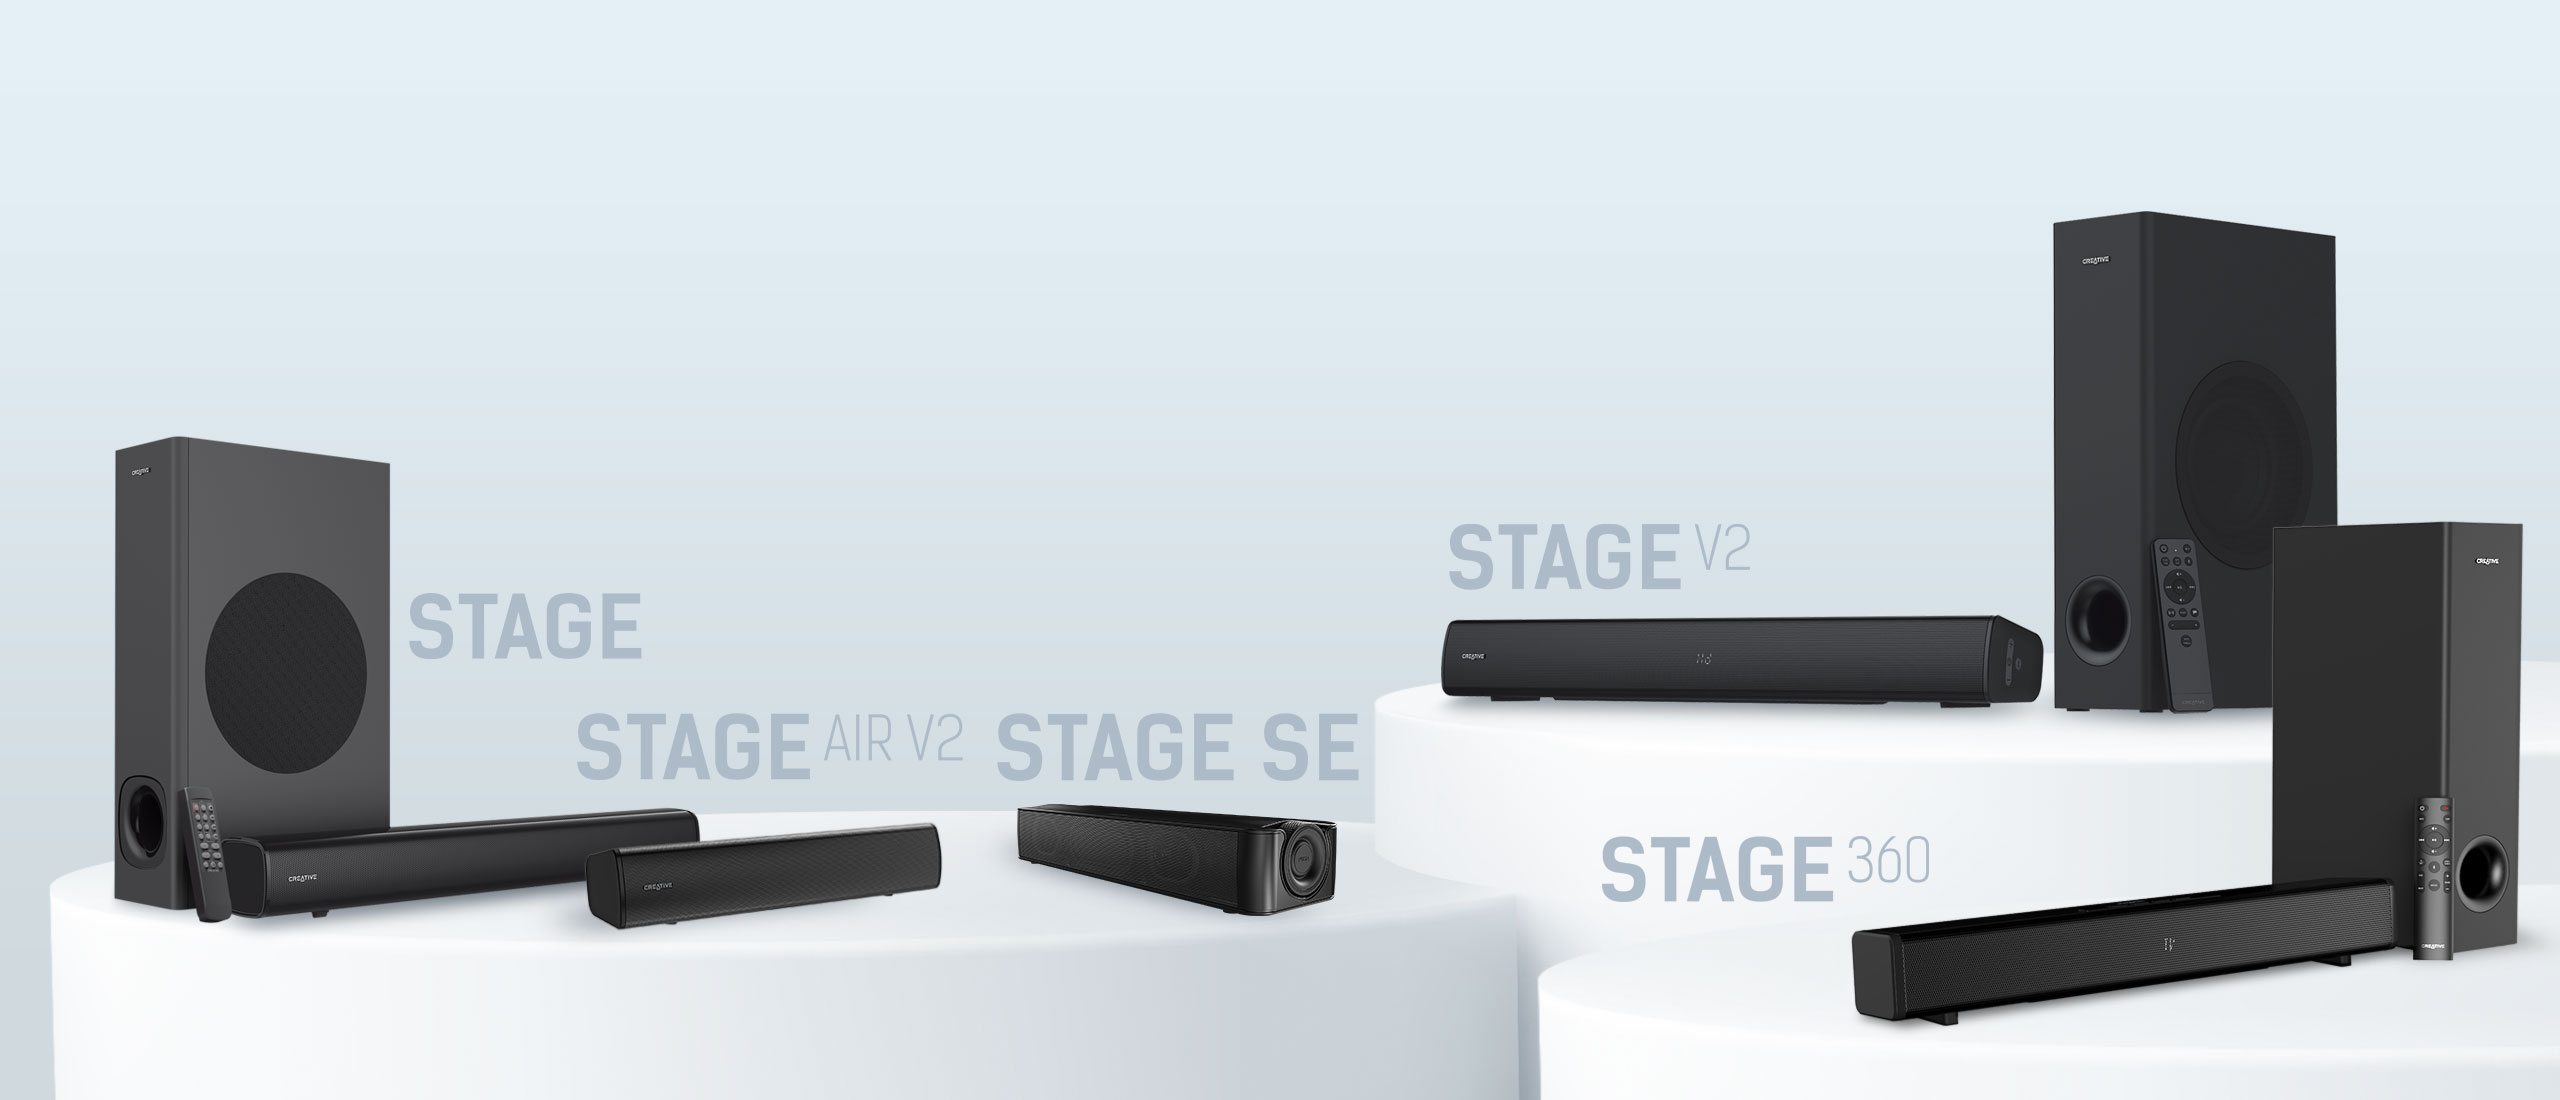 Stage Soundbars Series and - Computers for Creative TV